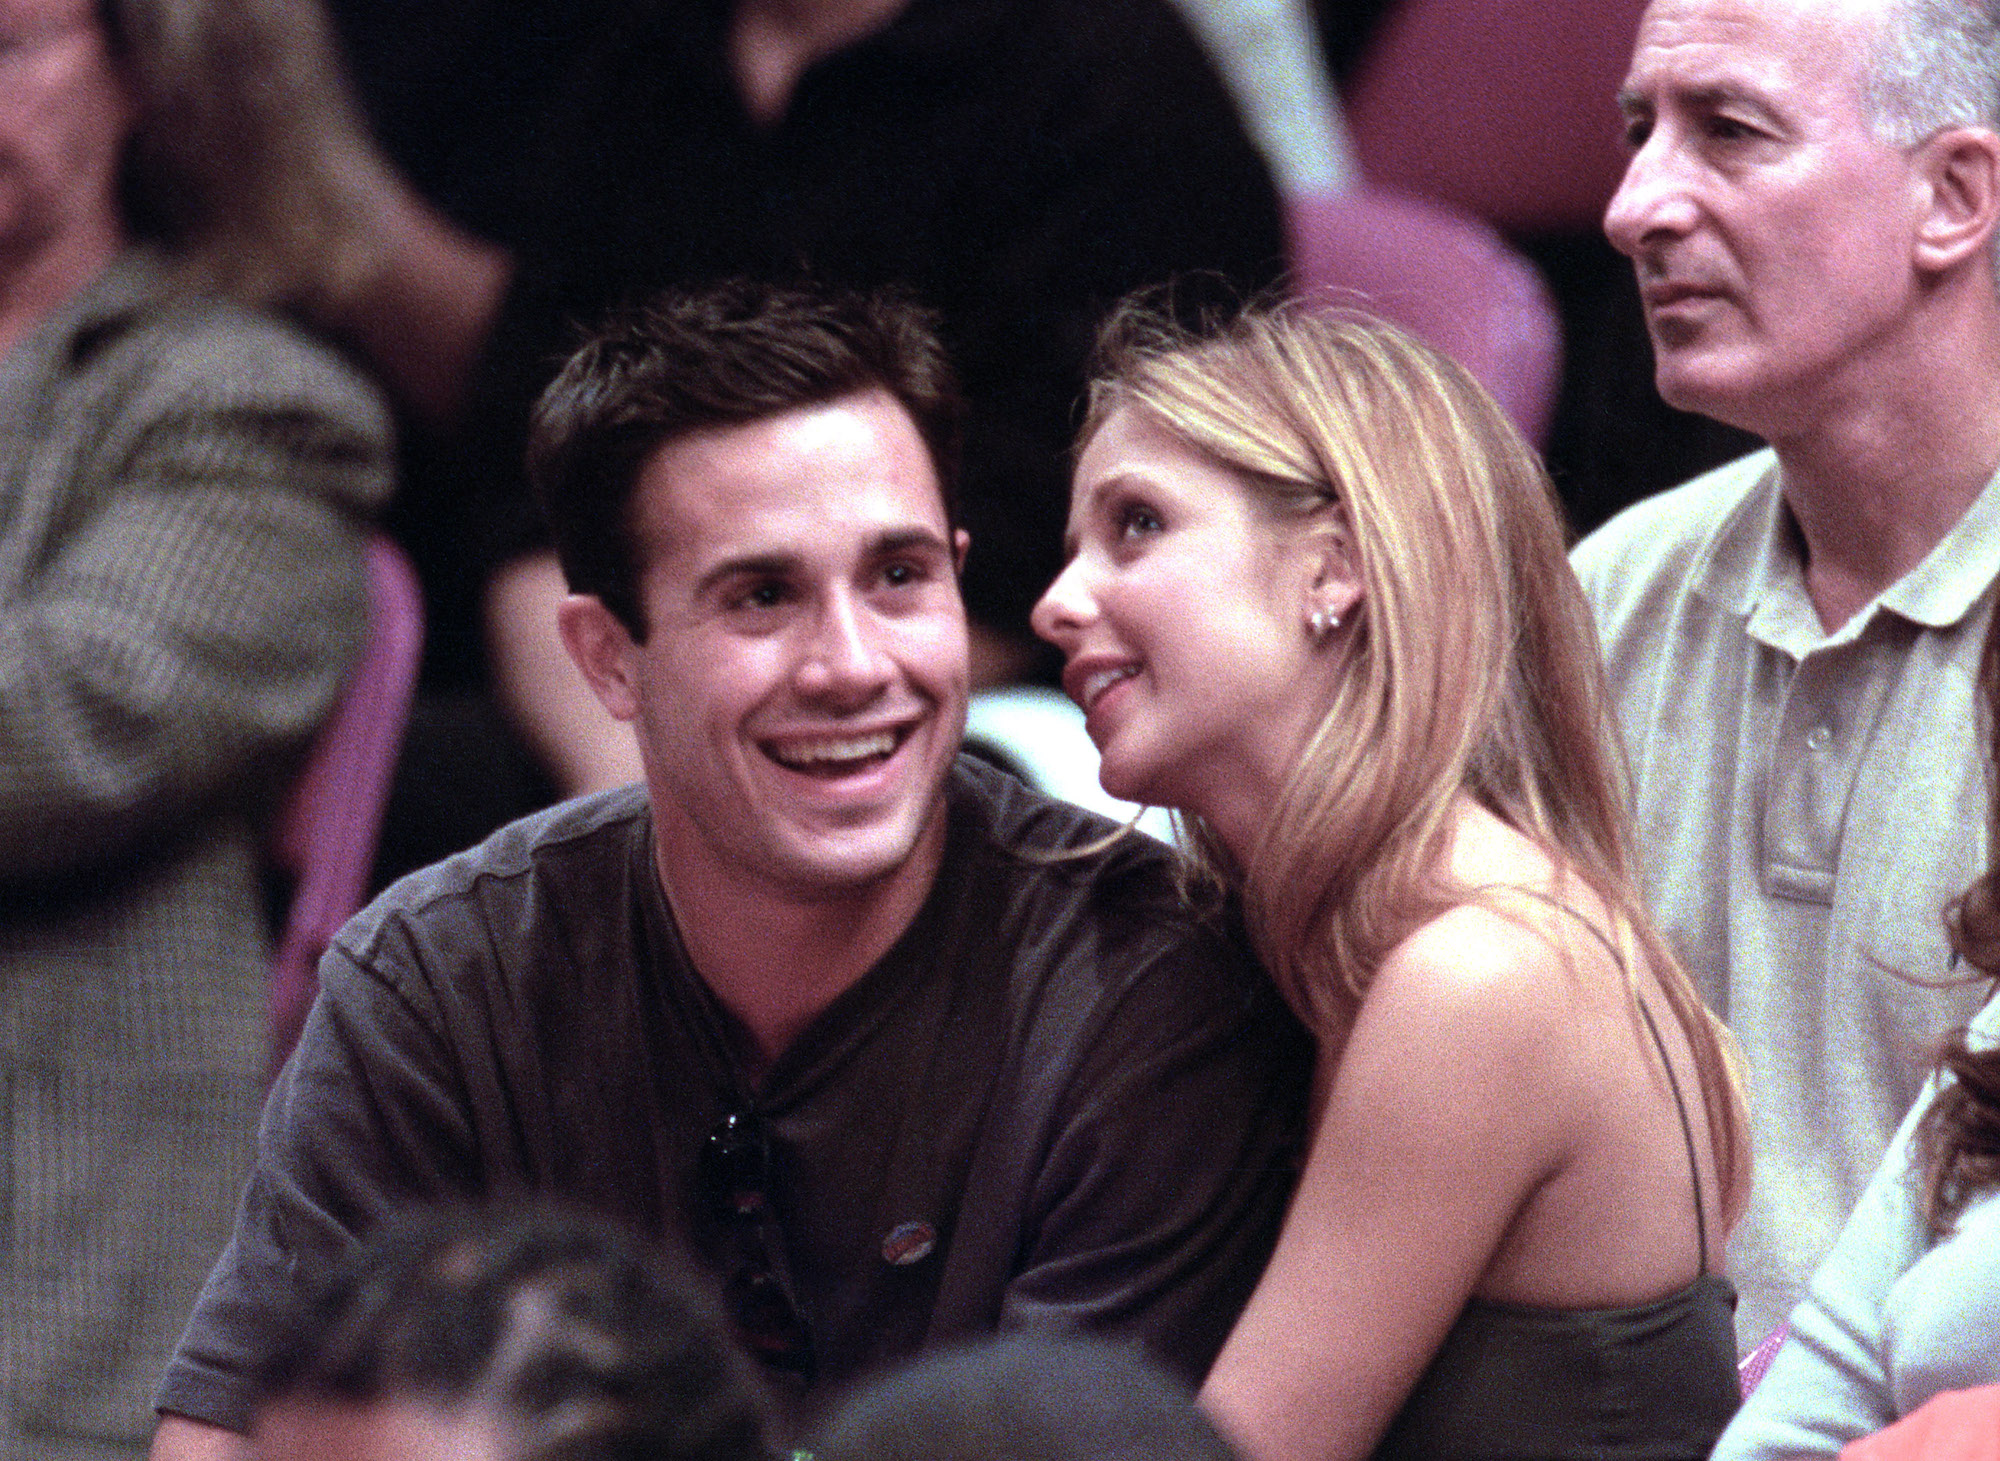 Sarah Michelle Gellar and Freddie Prinze Jr. during New York Knicks Vs. The Miami Heat in the NBA playoffs May 14th, 2000.